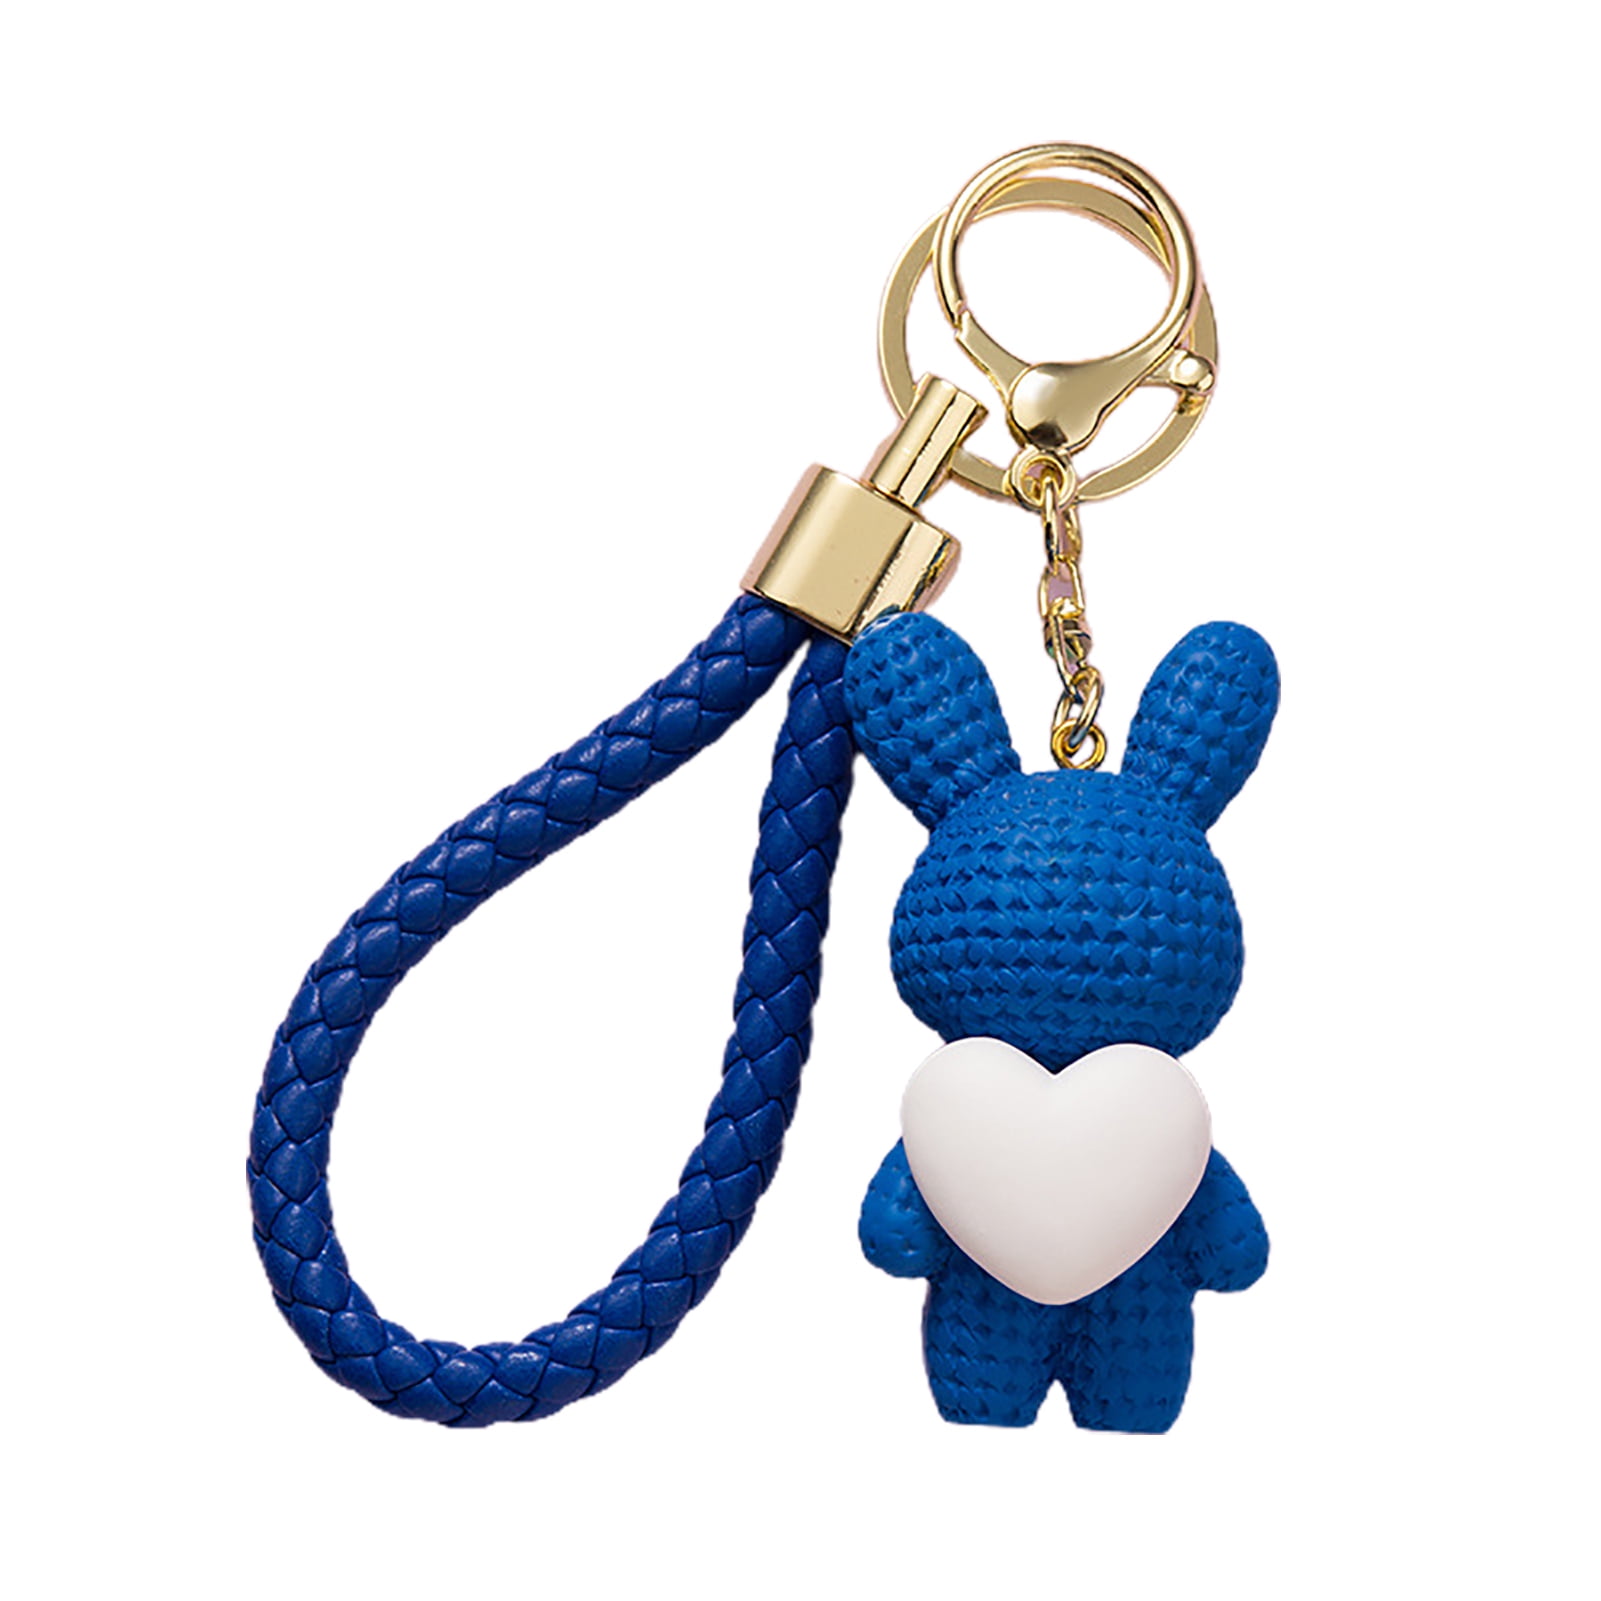 Mightlink Keychain Knitted Stereo Creative Cute Animal Shape Phone Bag Car Rabbit  Keychain for Daily Use 